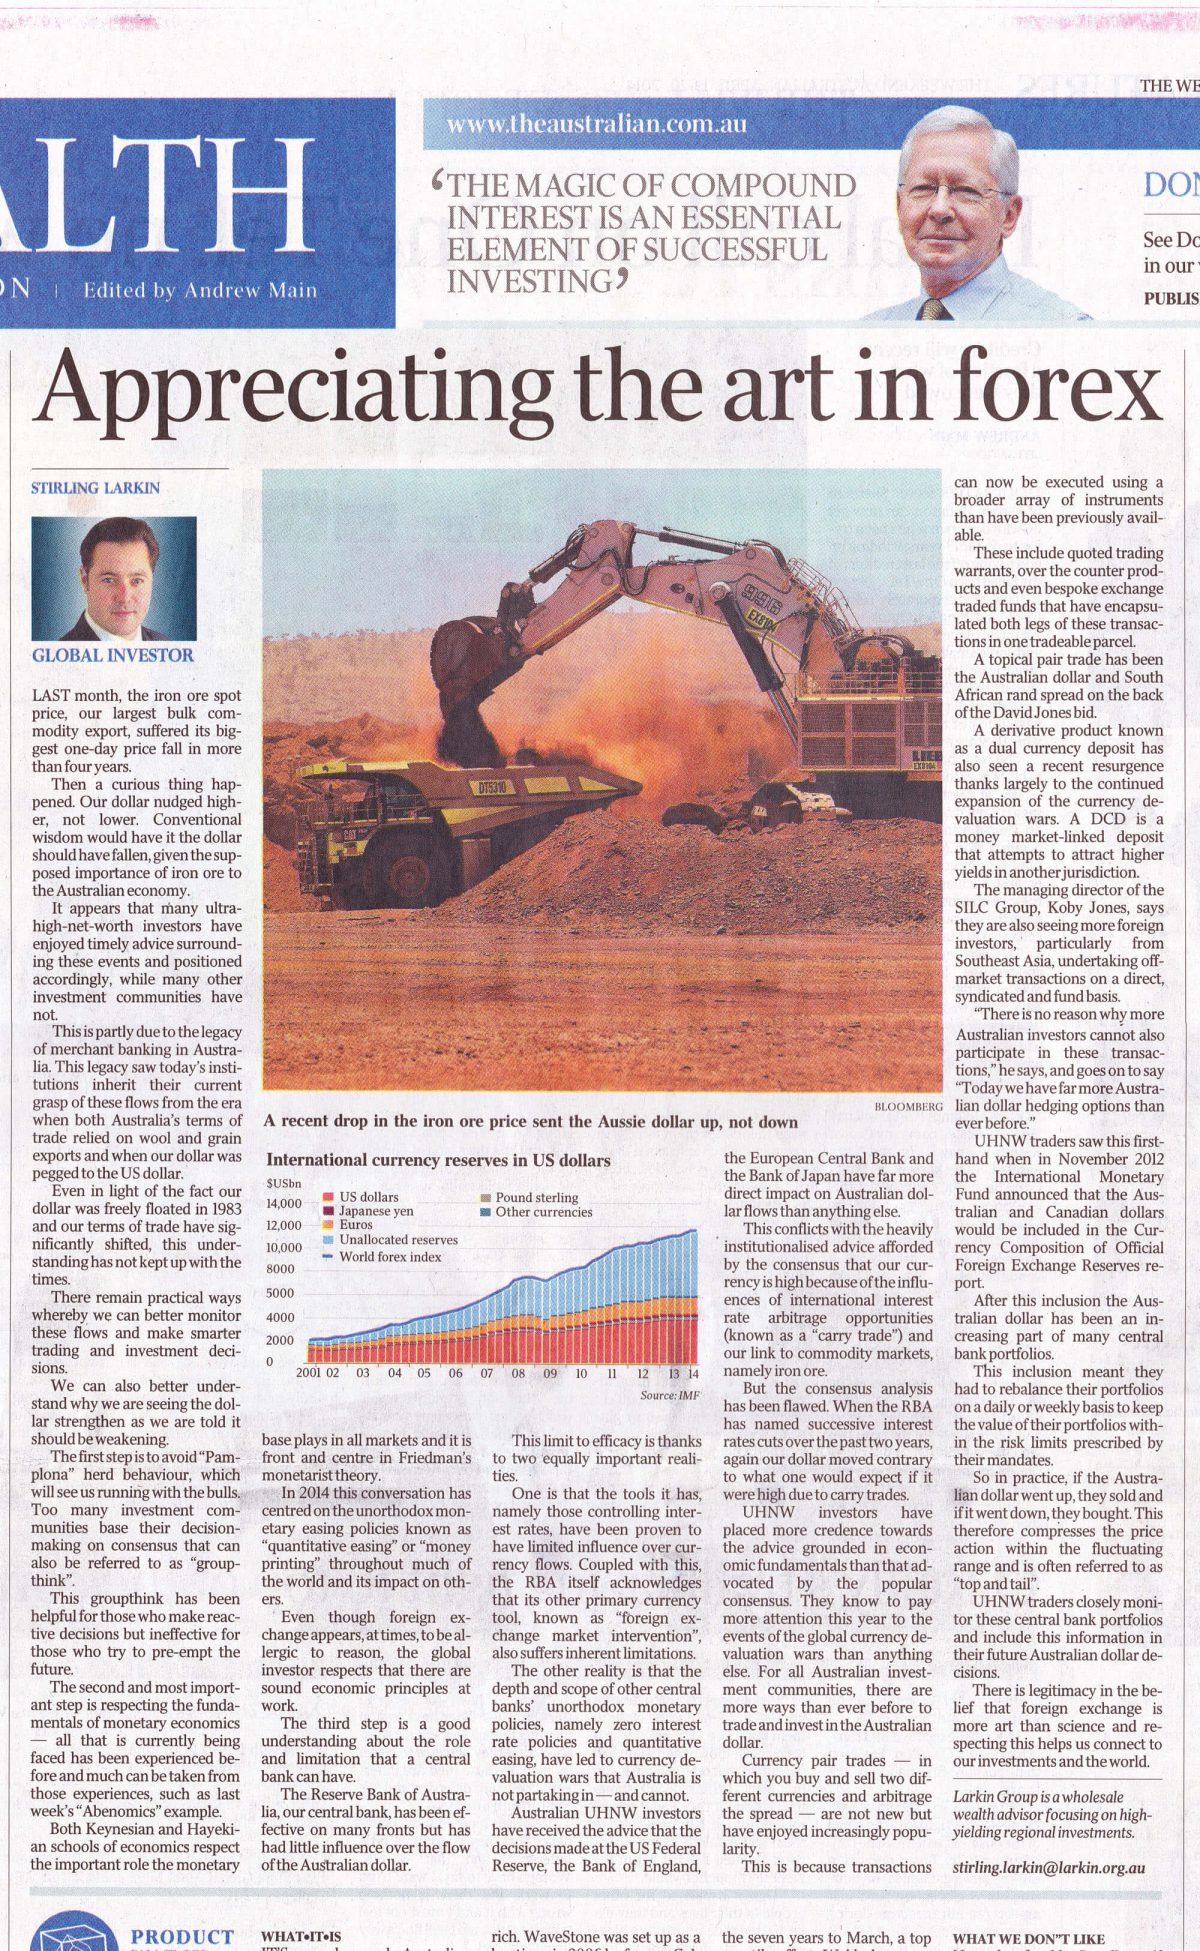 australian standfirst discusses FFOREX 2014 in the australian newspaper